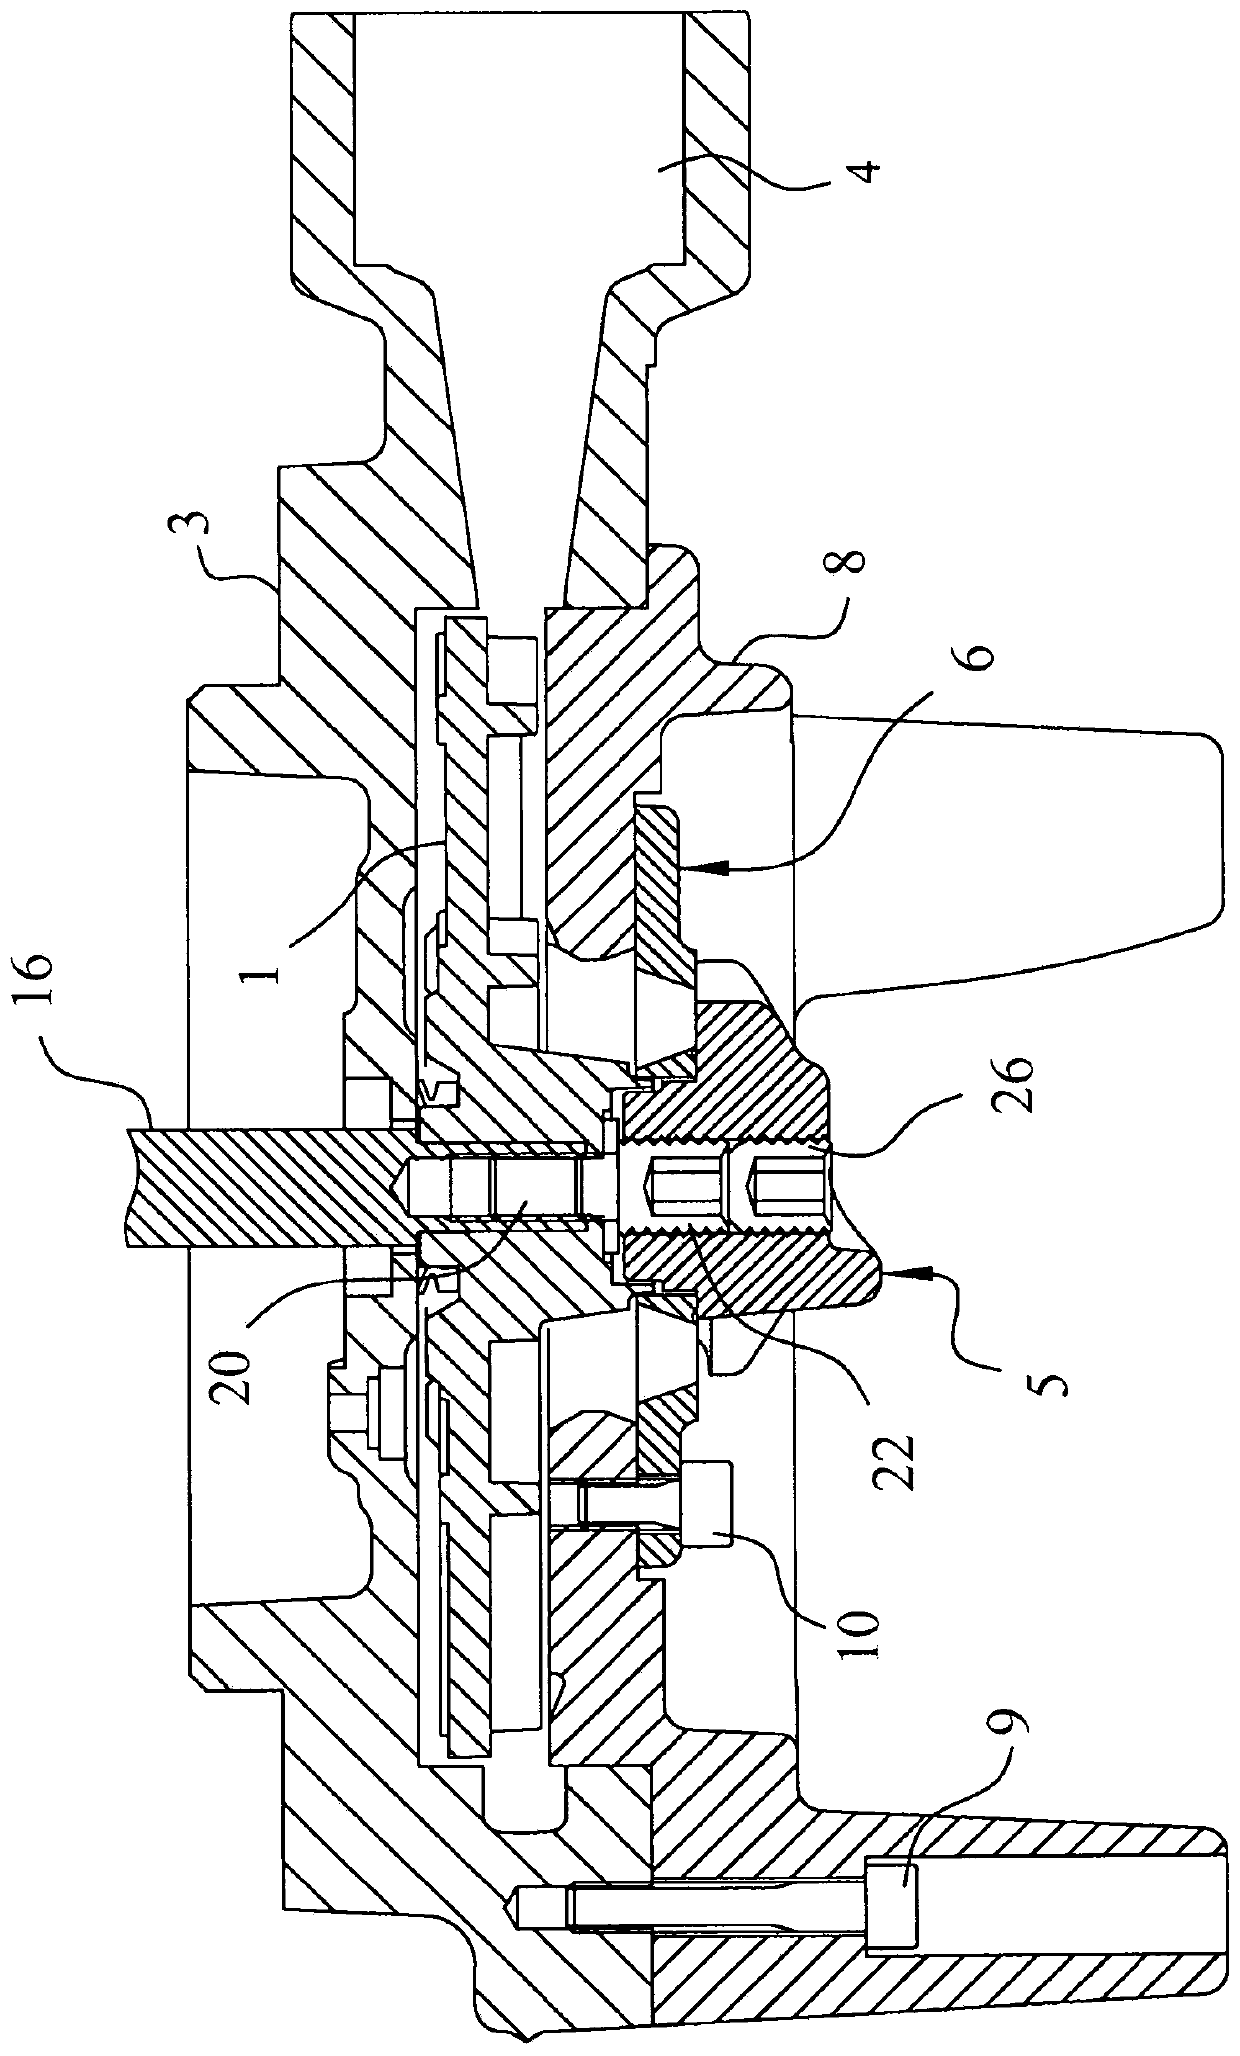 Method for providing axial gap in cutter assembly of grinder pump, and grinder pump comprising shim configured for providing said axial gap